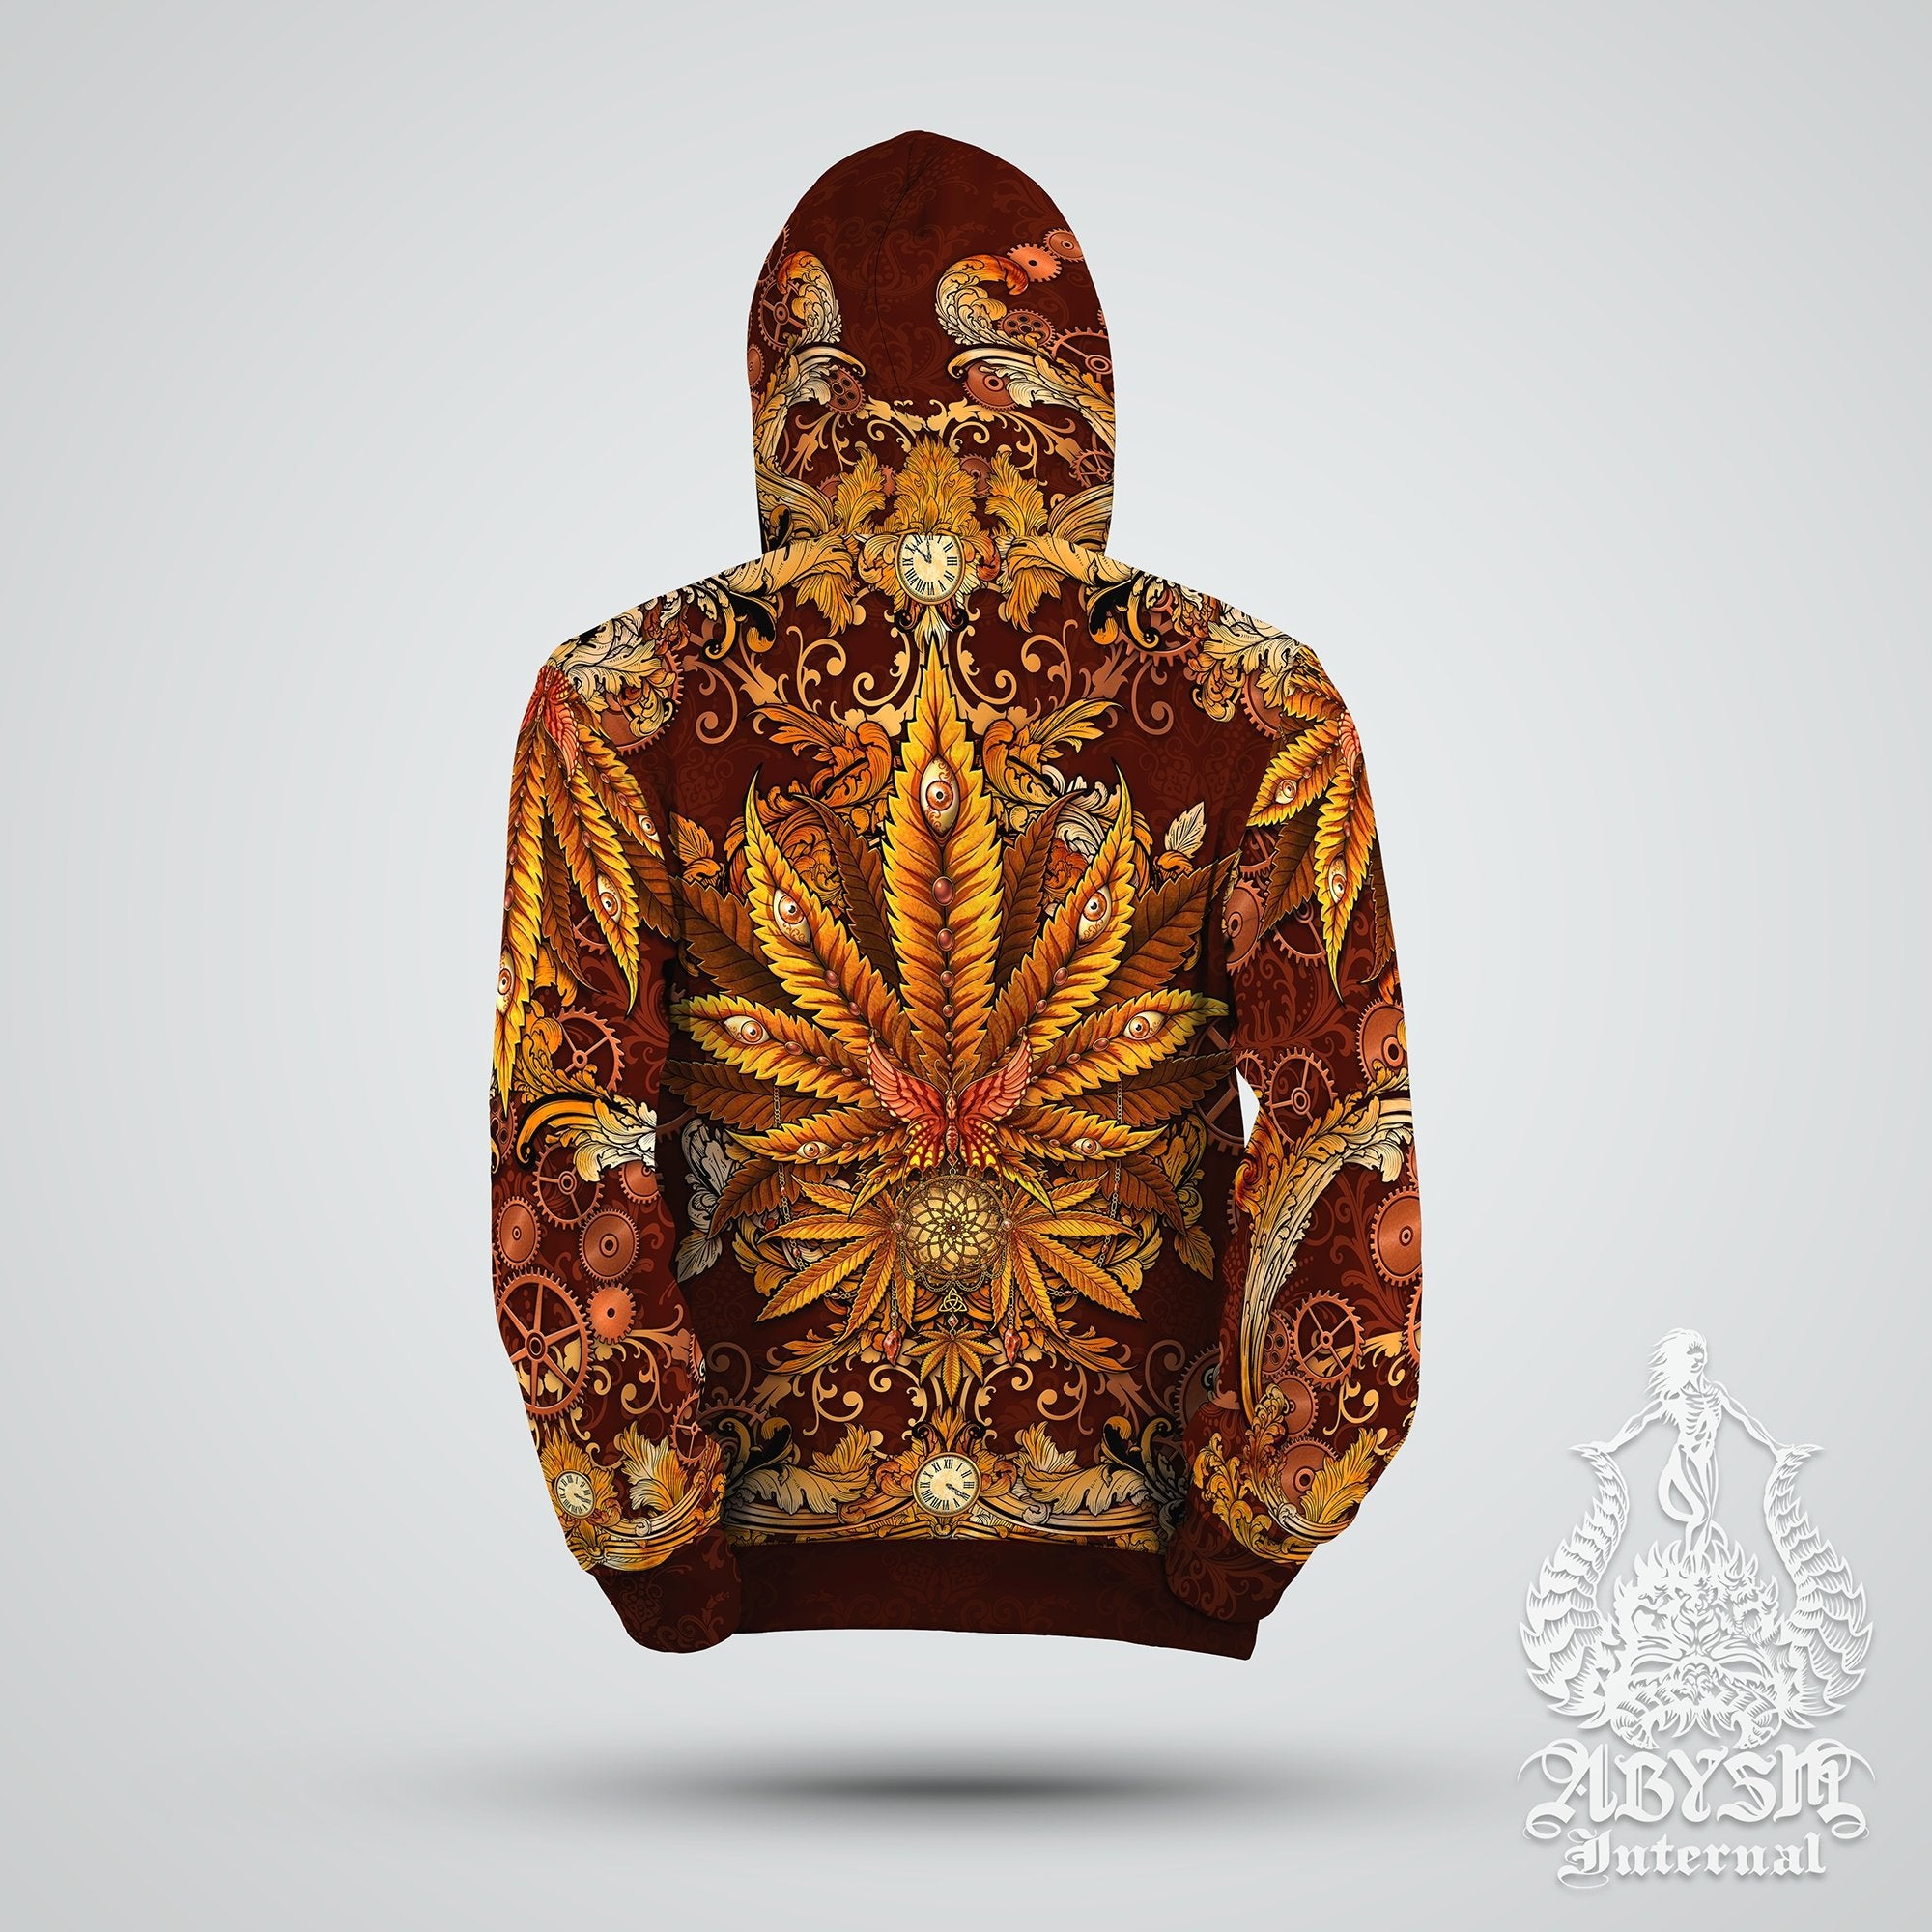 Weed Hoodie, Cannabis Sweater, Steampunk Festival Outfit, Trippy Streetwear, Indie and Alternative Clothing, Unisex, 420 Gift - Marijuana - Abysm Internal